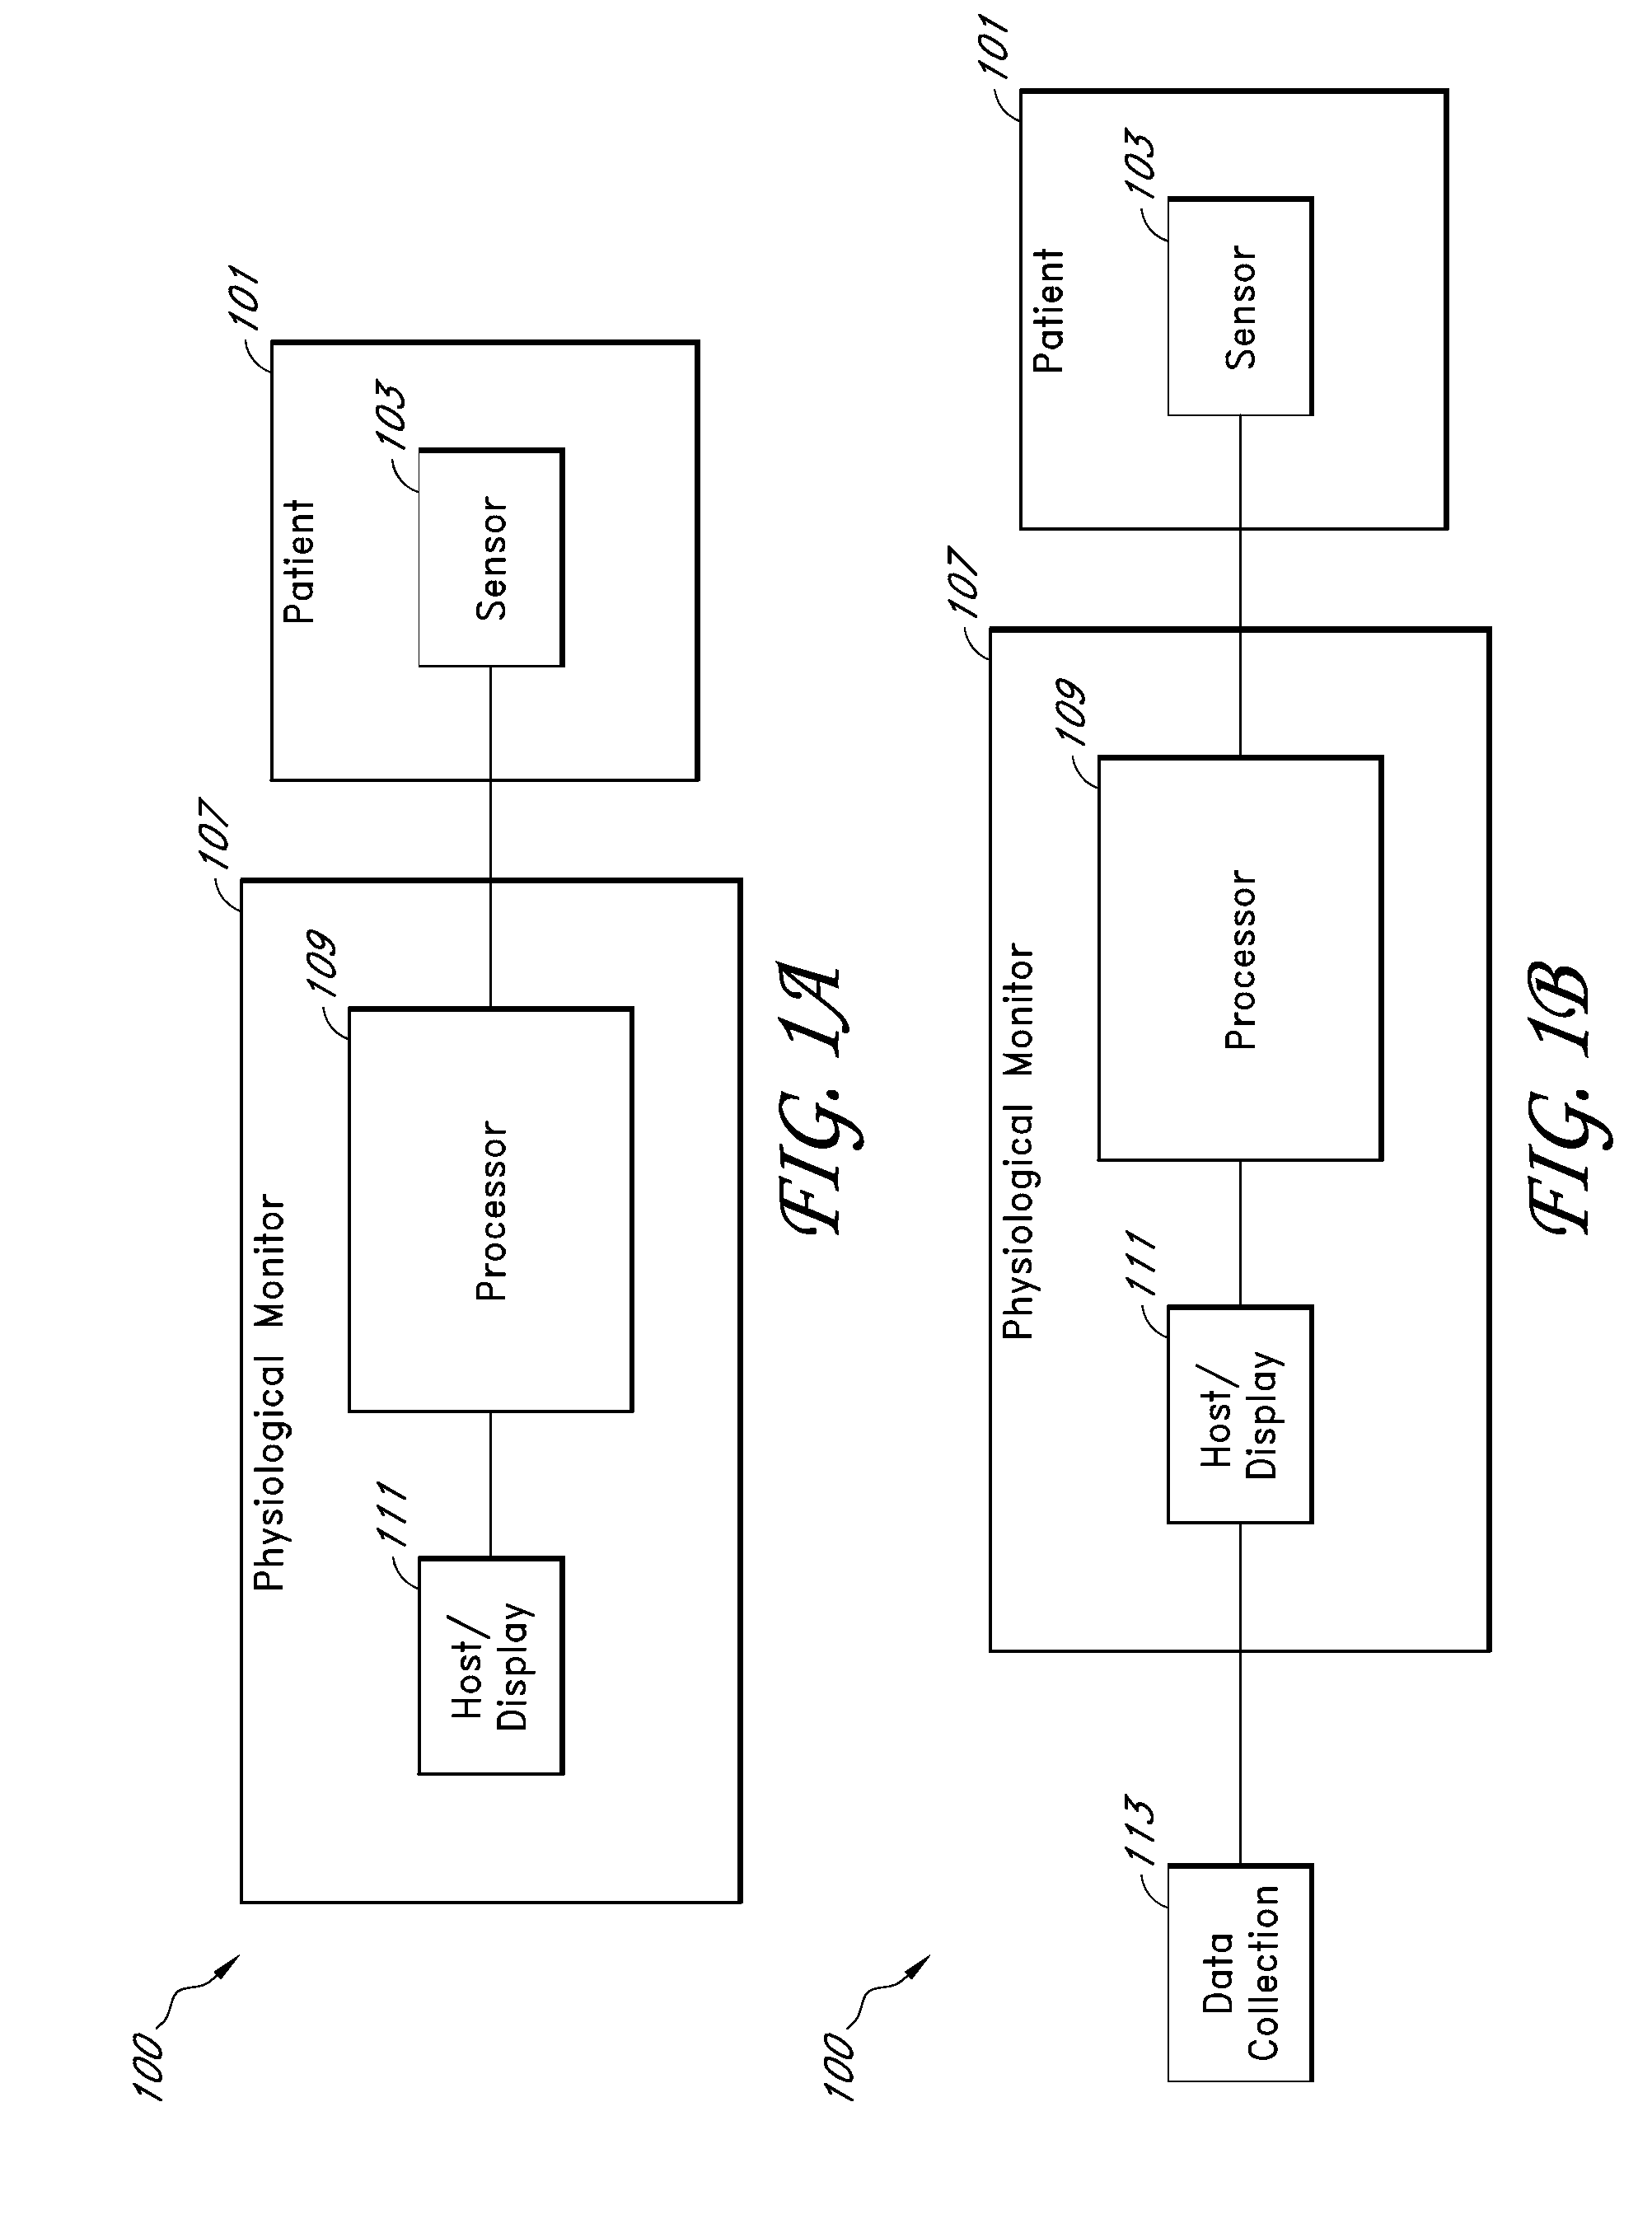 Systems and methods for determining a physiological condition using an acoustic monitor